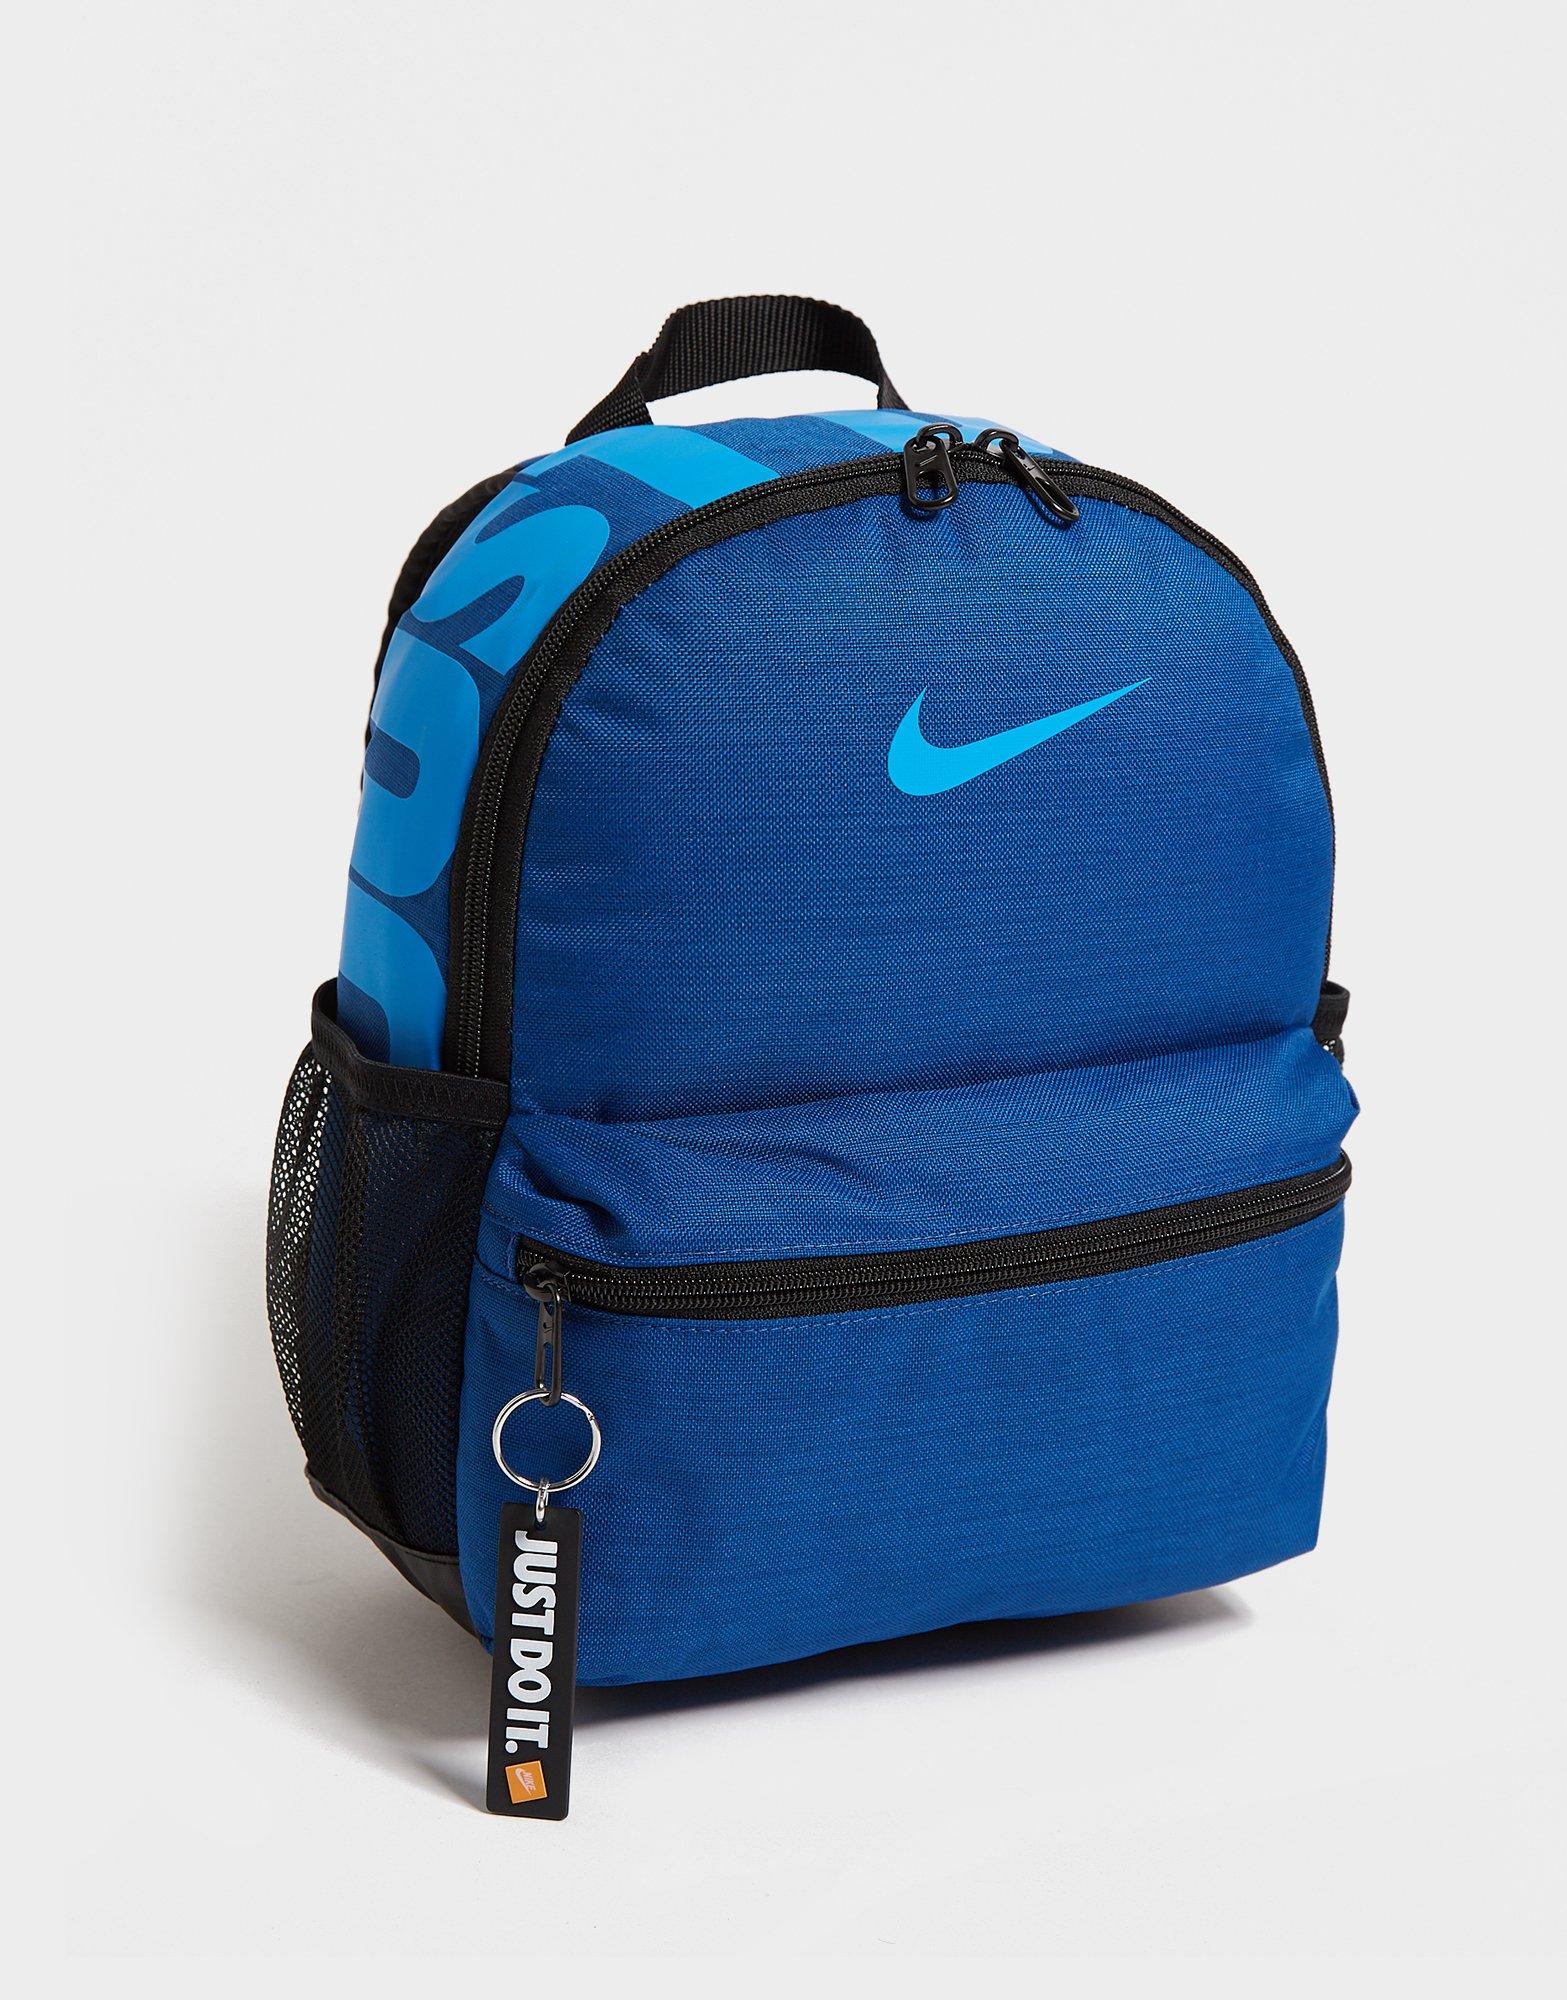 jd just do it bag